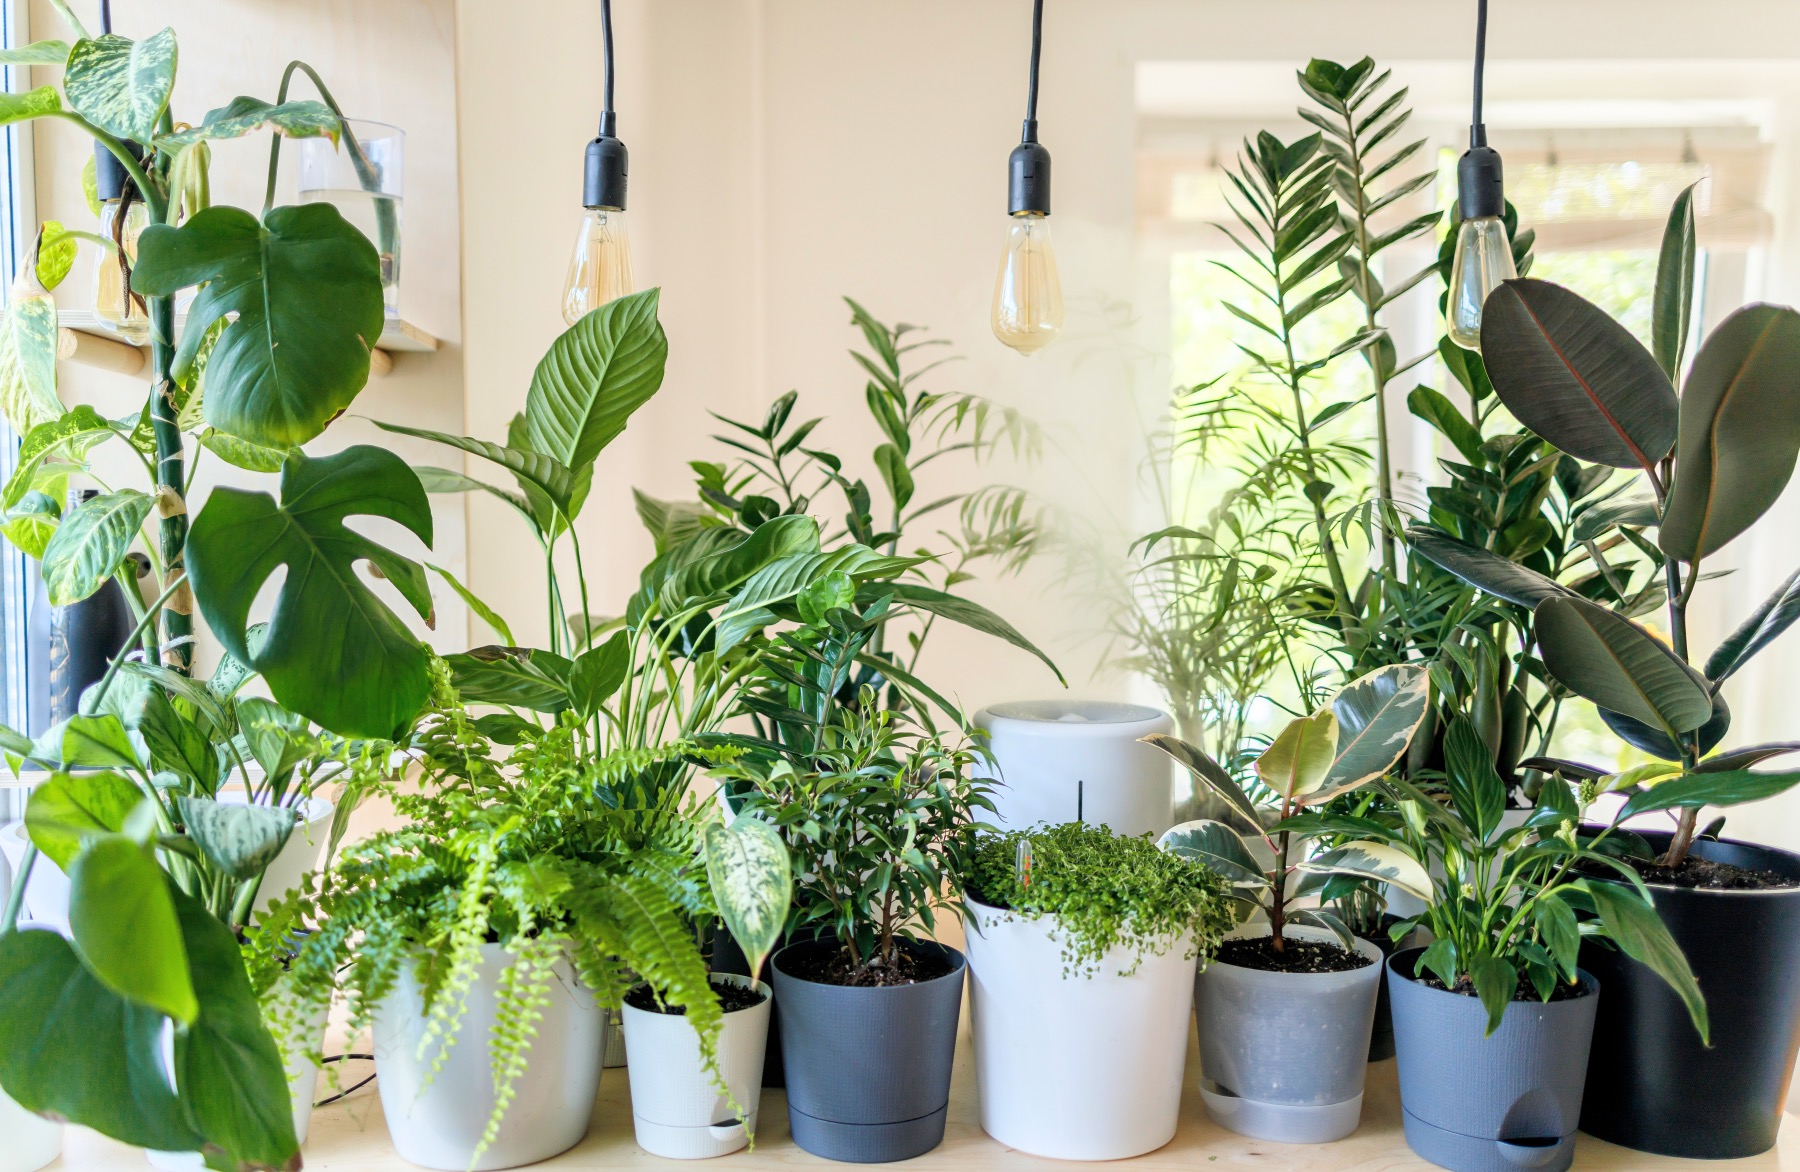 ferns and other house plants gardening care guide